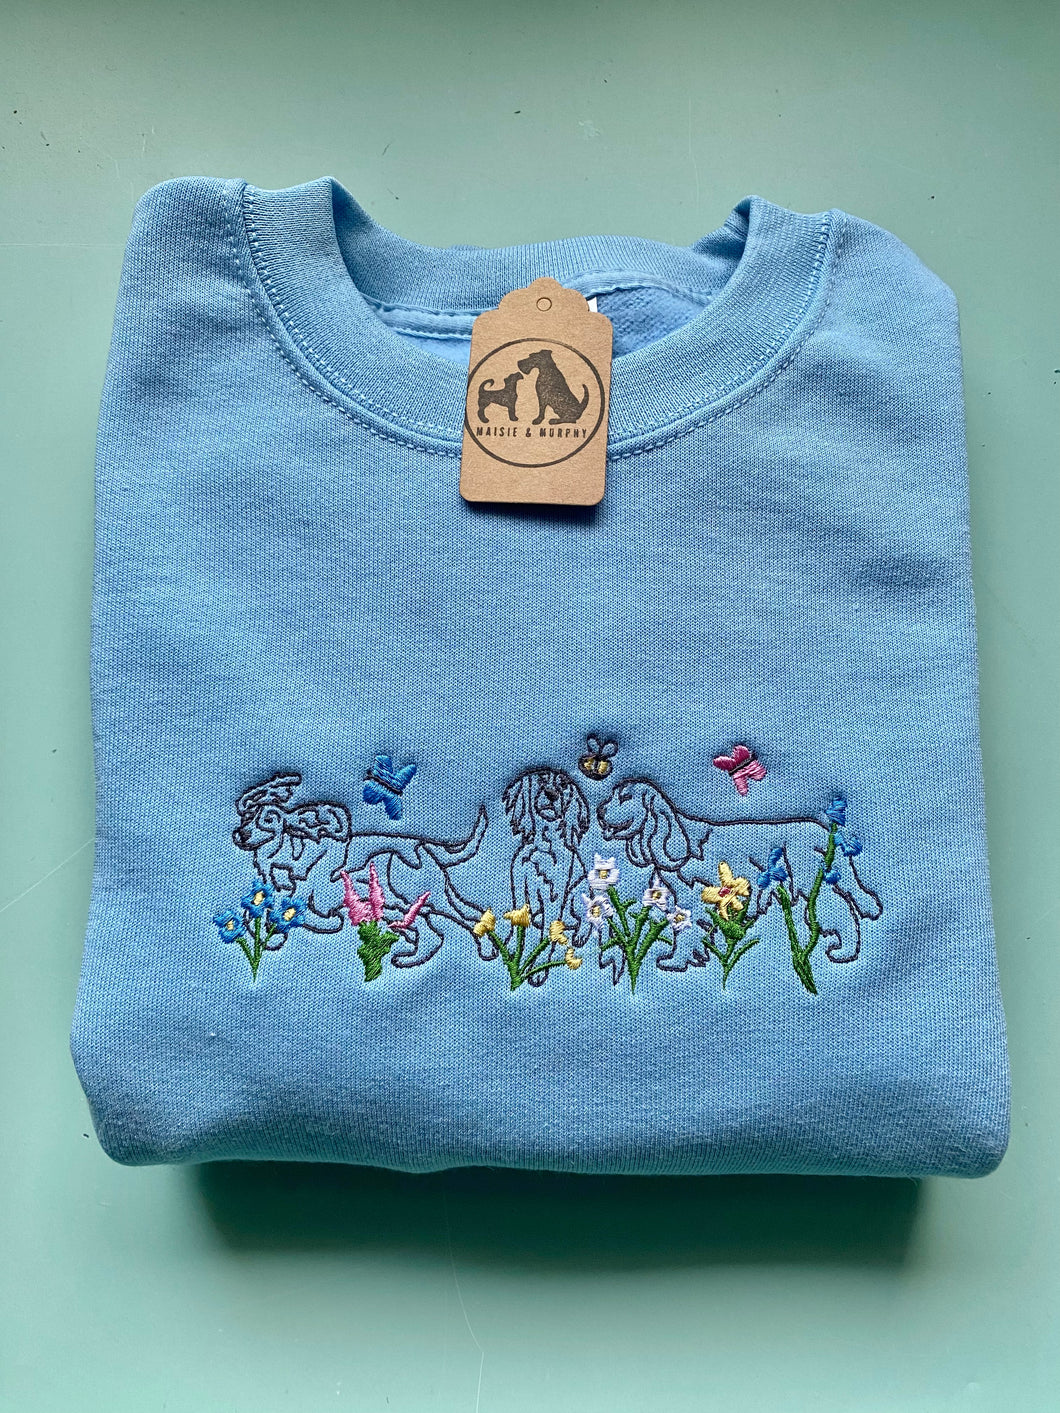 DOODLE - Wildflower Dogs Sweatshirt - Embroidered sweater for dog lovers